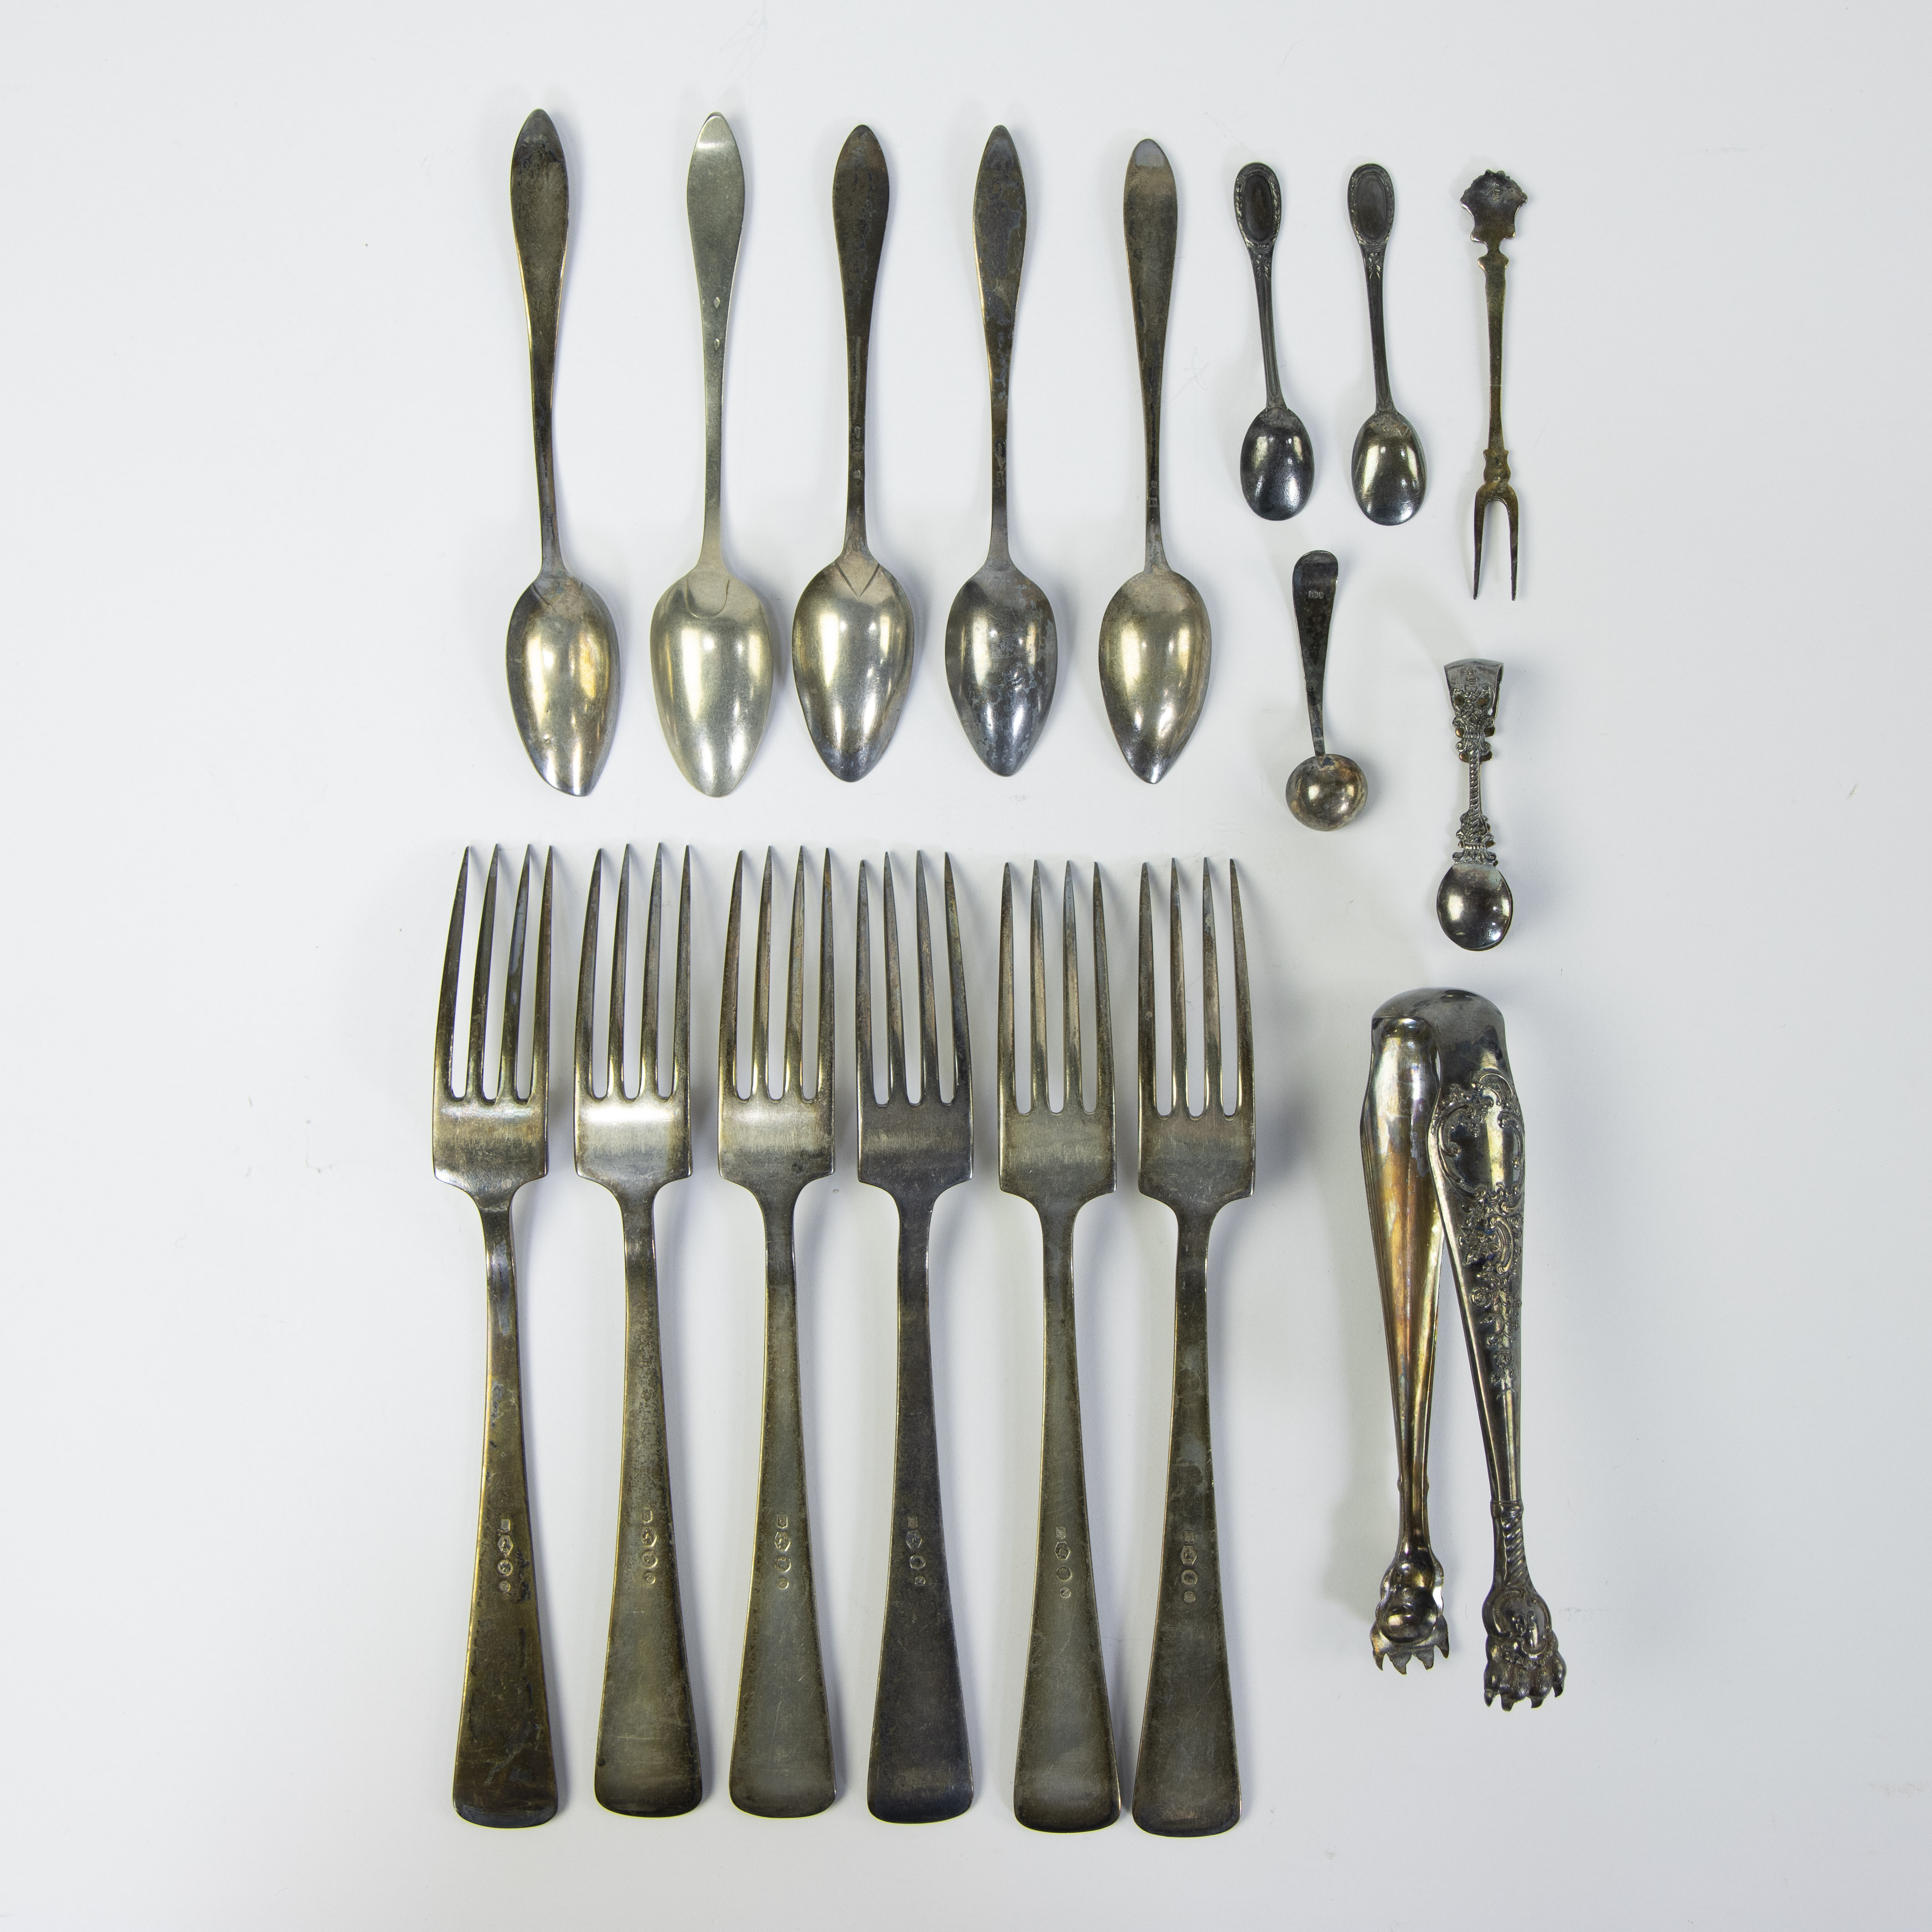 Lot silver forks, spoons silver 835, year letter N = 1923, mini square head B = city hallmark Utrech